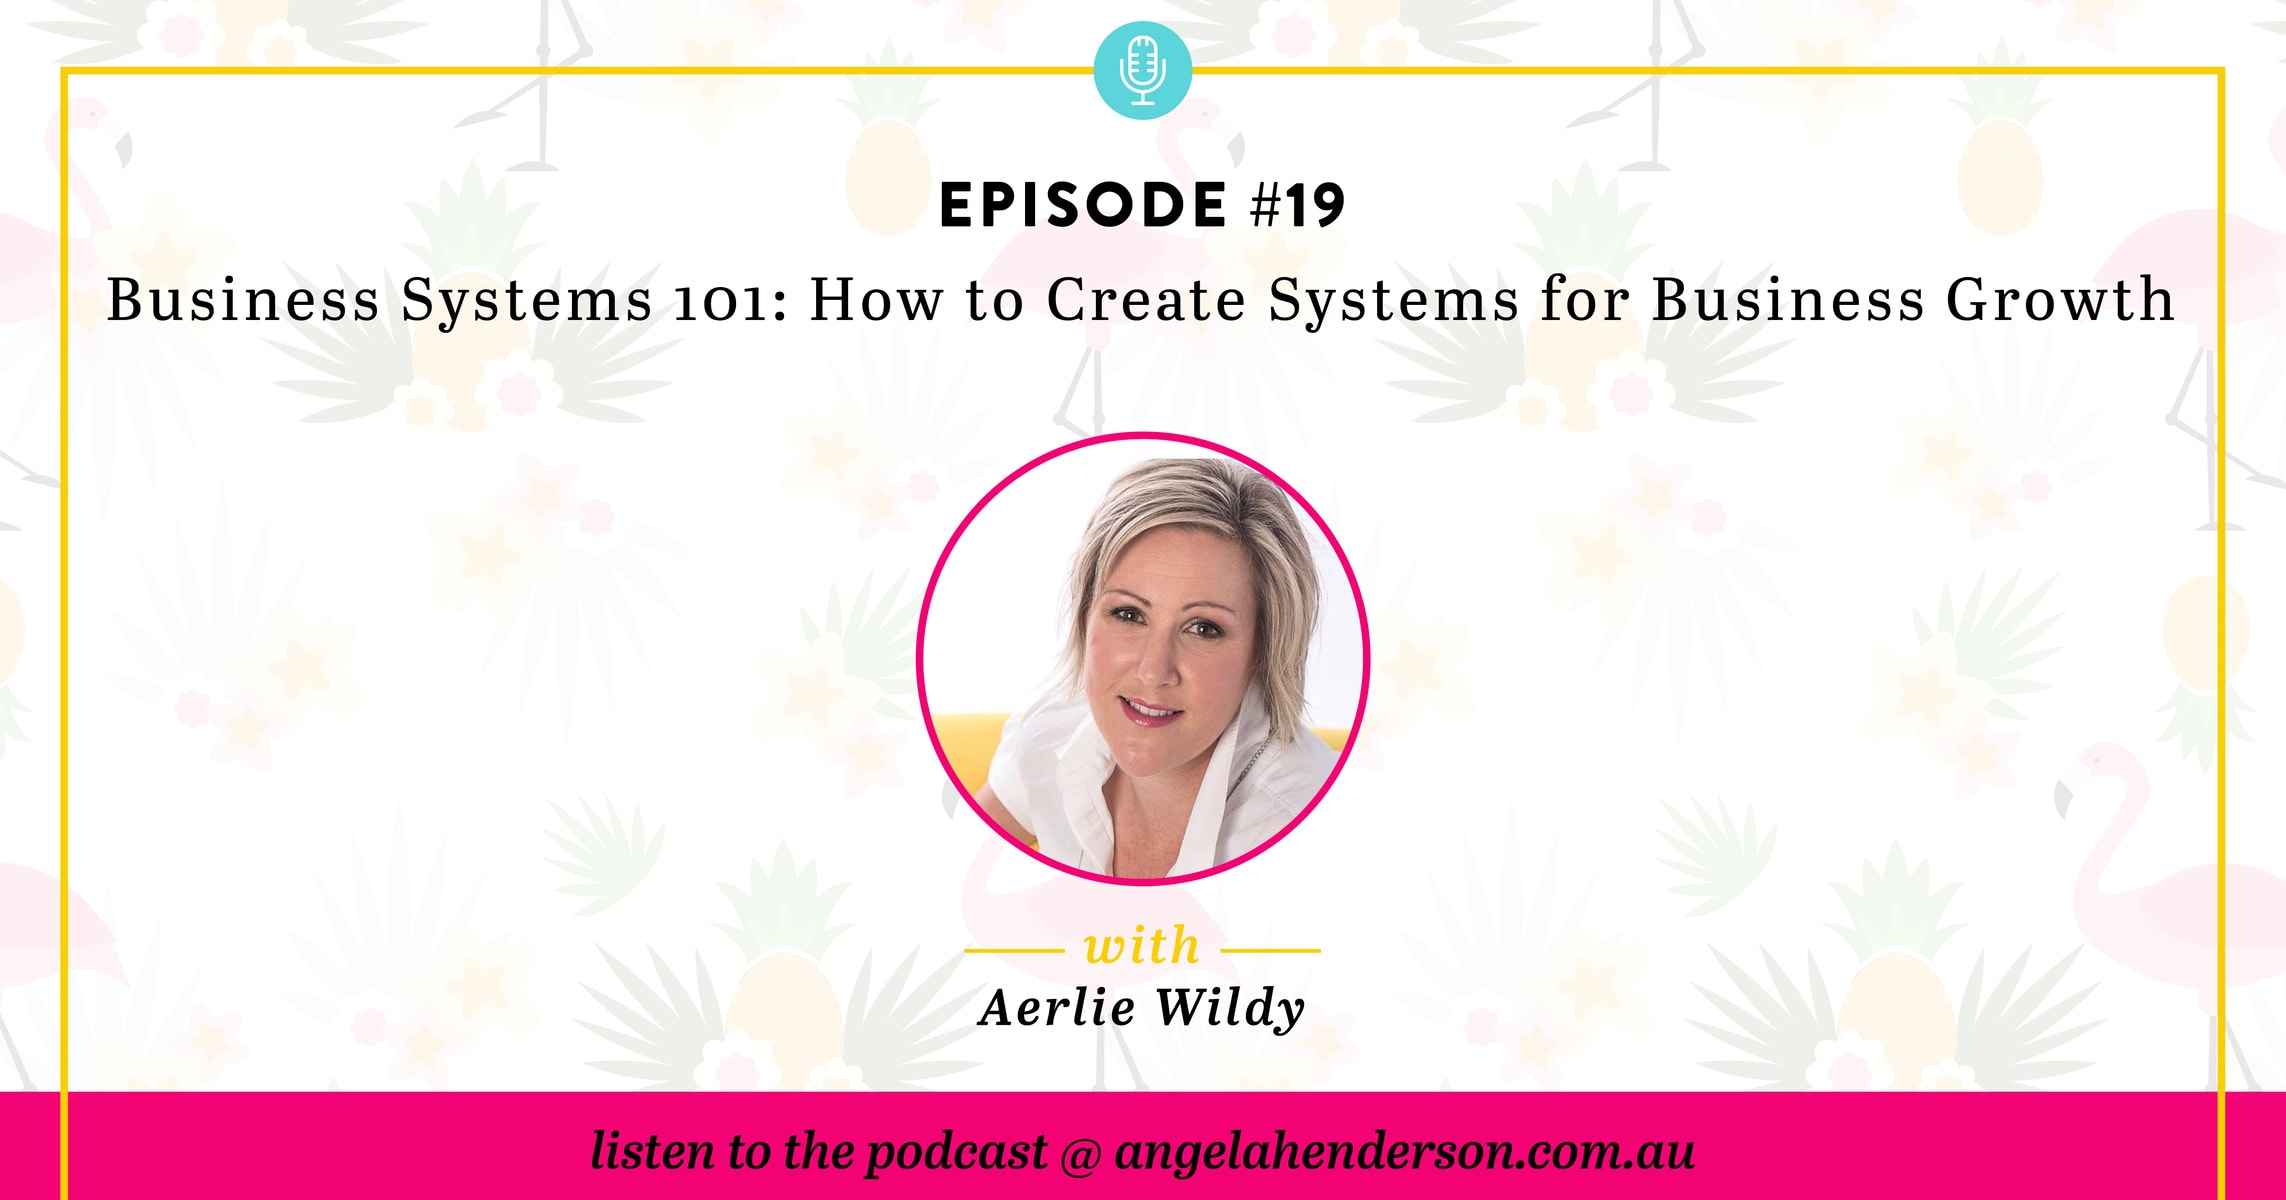 Business Systems 101: How to Create Systems for Business Growth